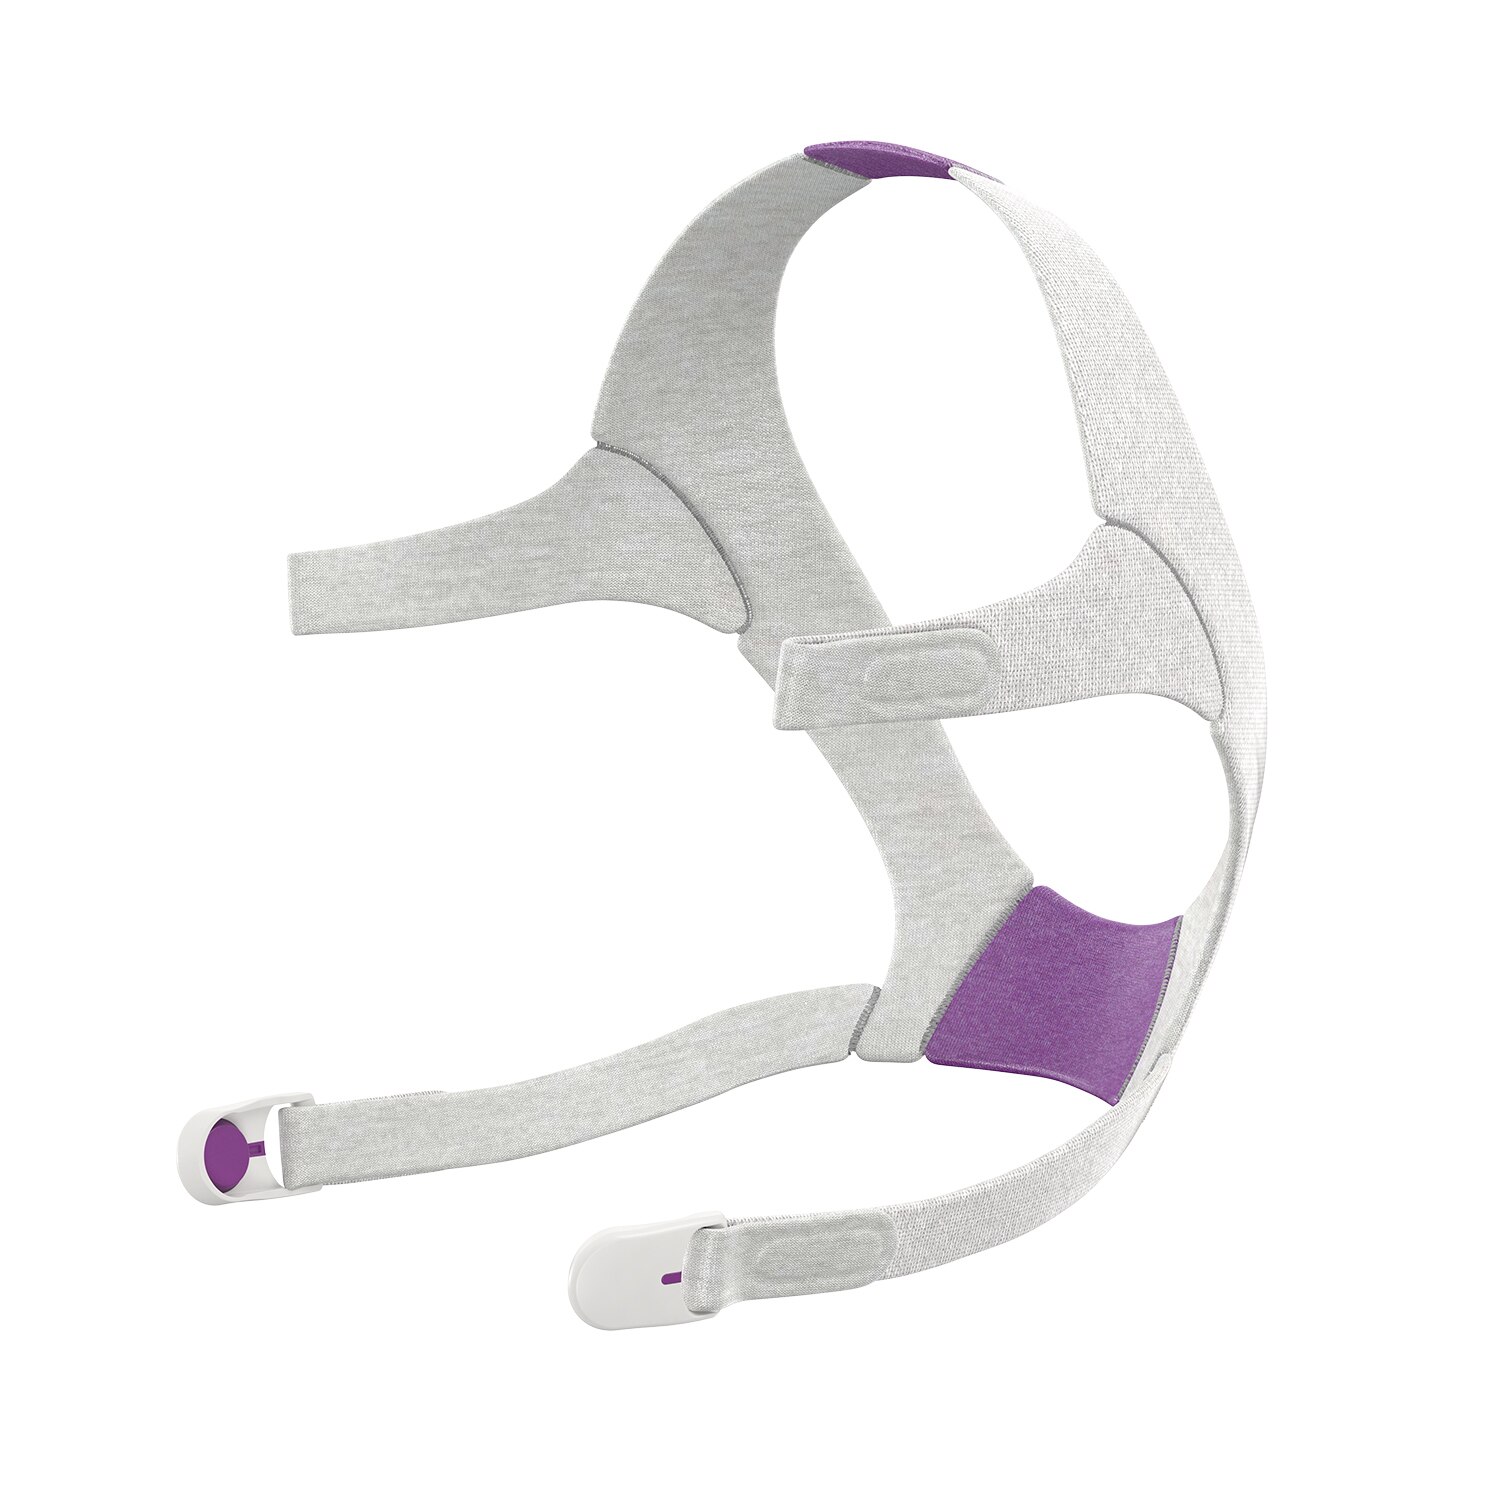 ResMed AirFit N20 for Her (headgear only), Standard